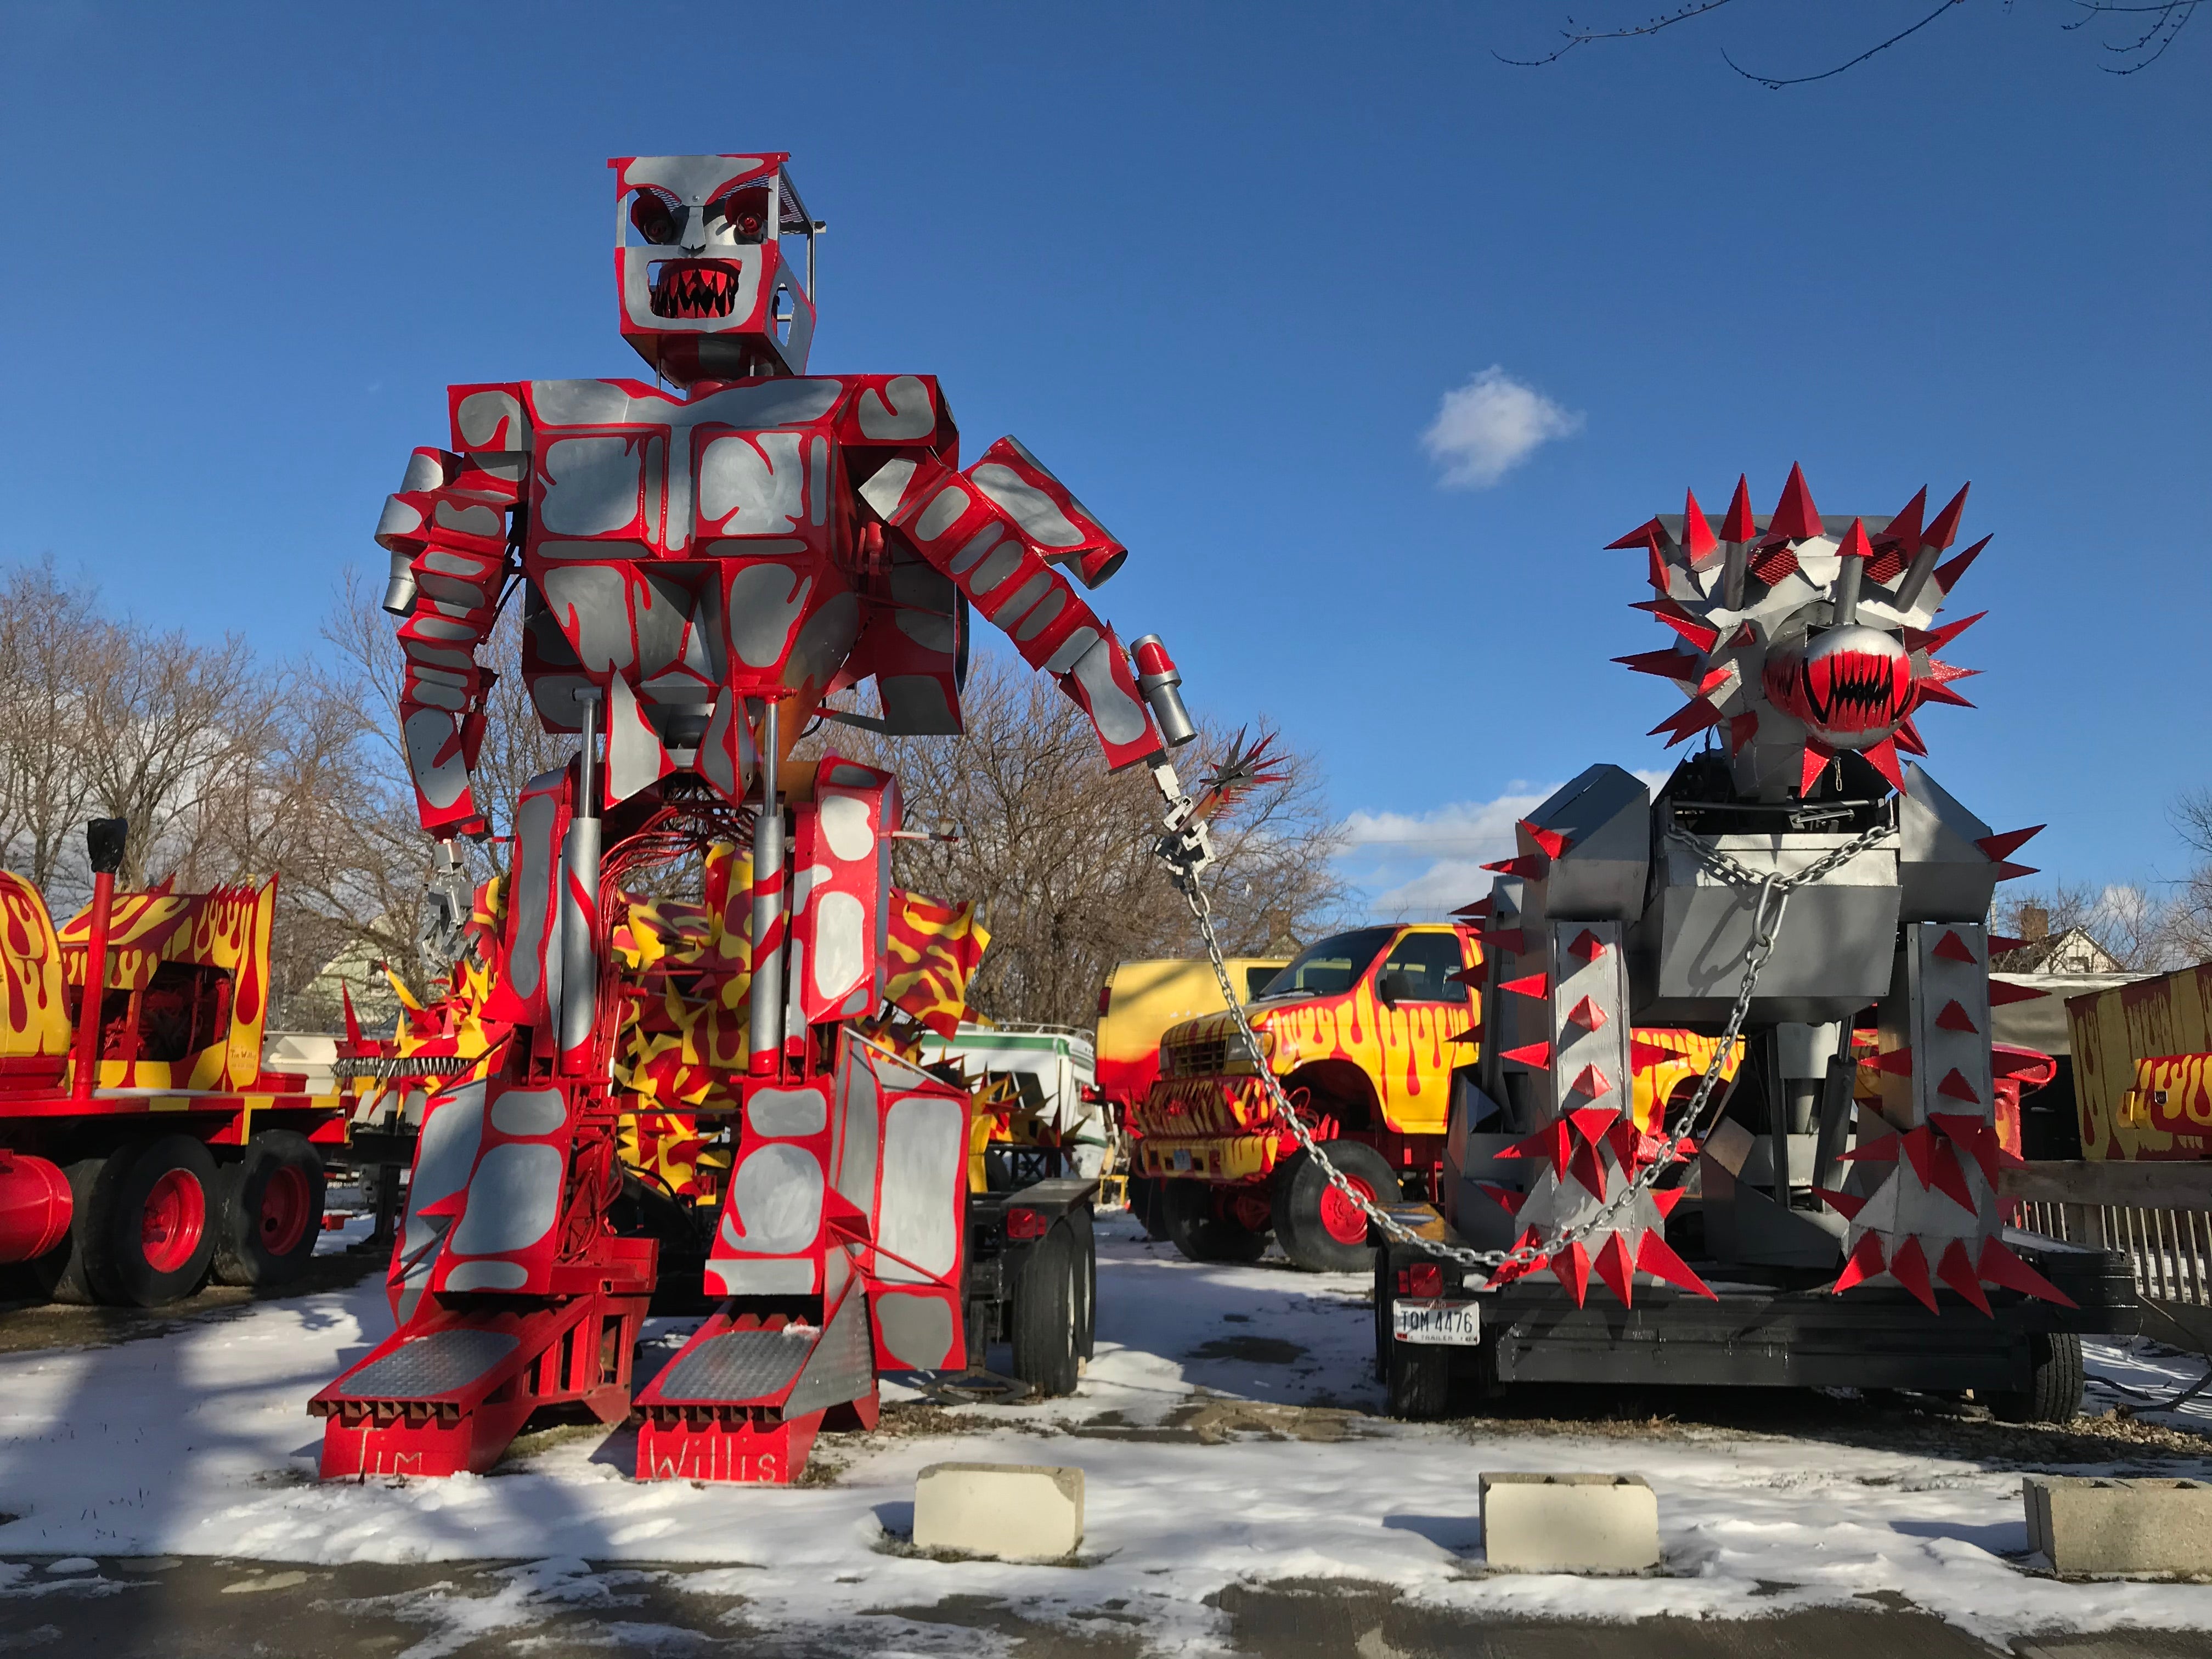 A large grey and red robot and spiked dog with red and yellow trucks in the background